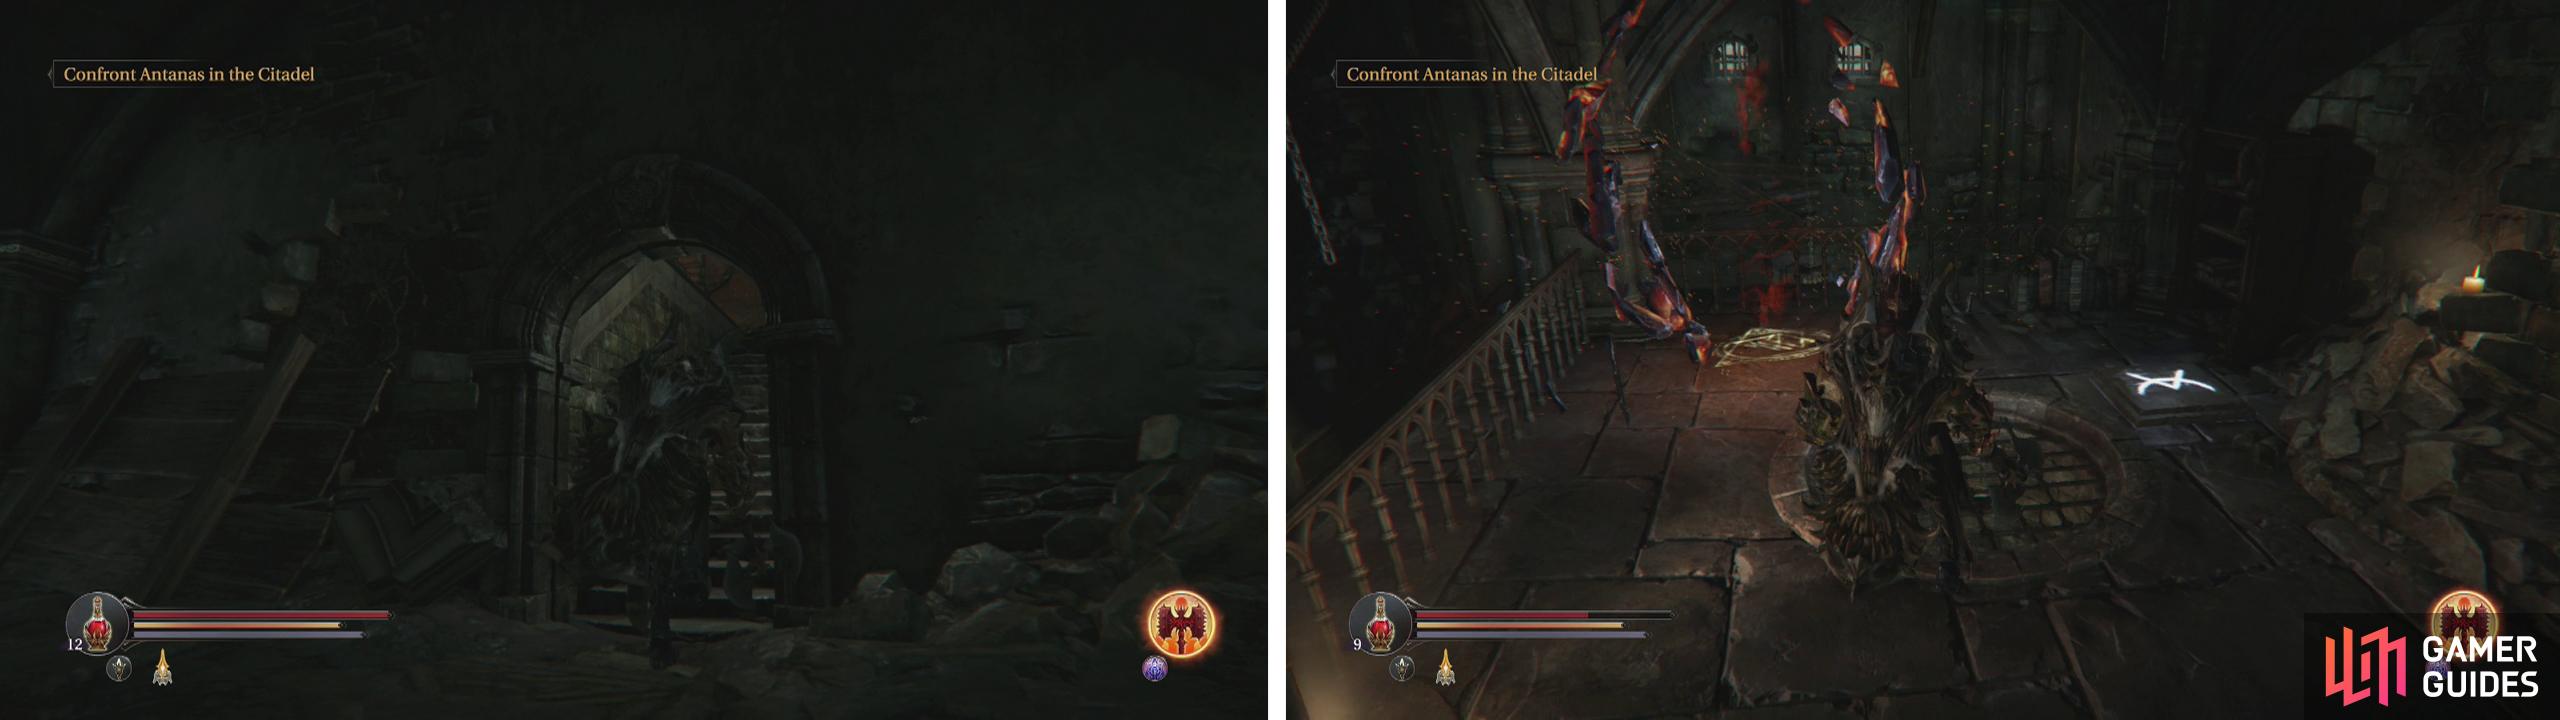 Exit the Flooded Hallways via the available stairway (left). On the next floor up youll find the final Loot Crystal (right).